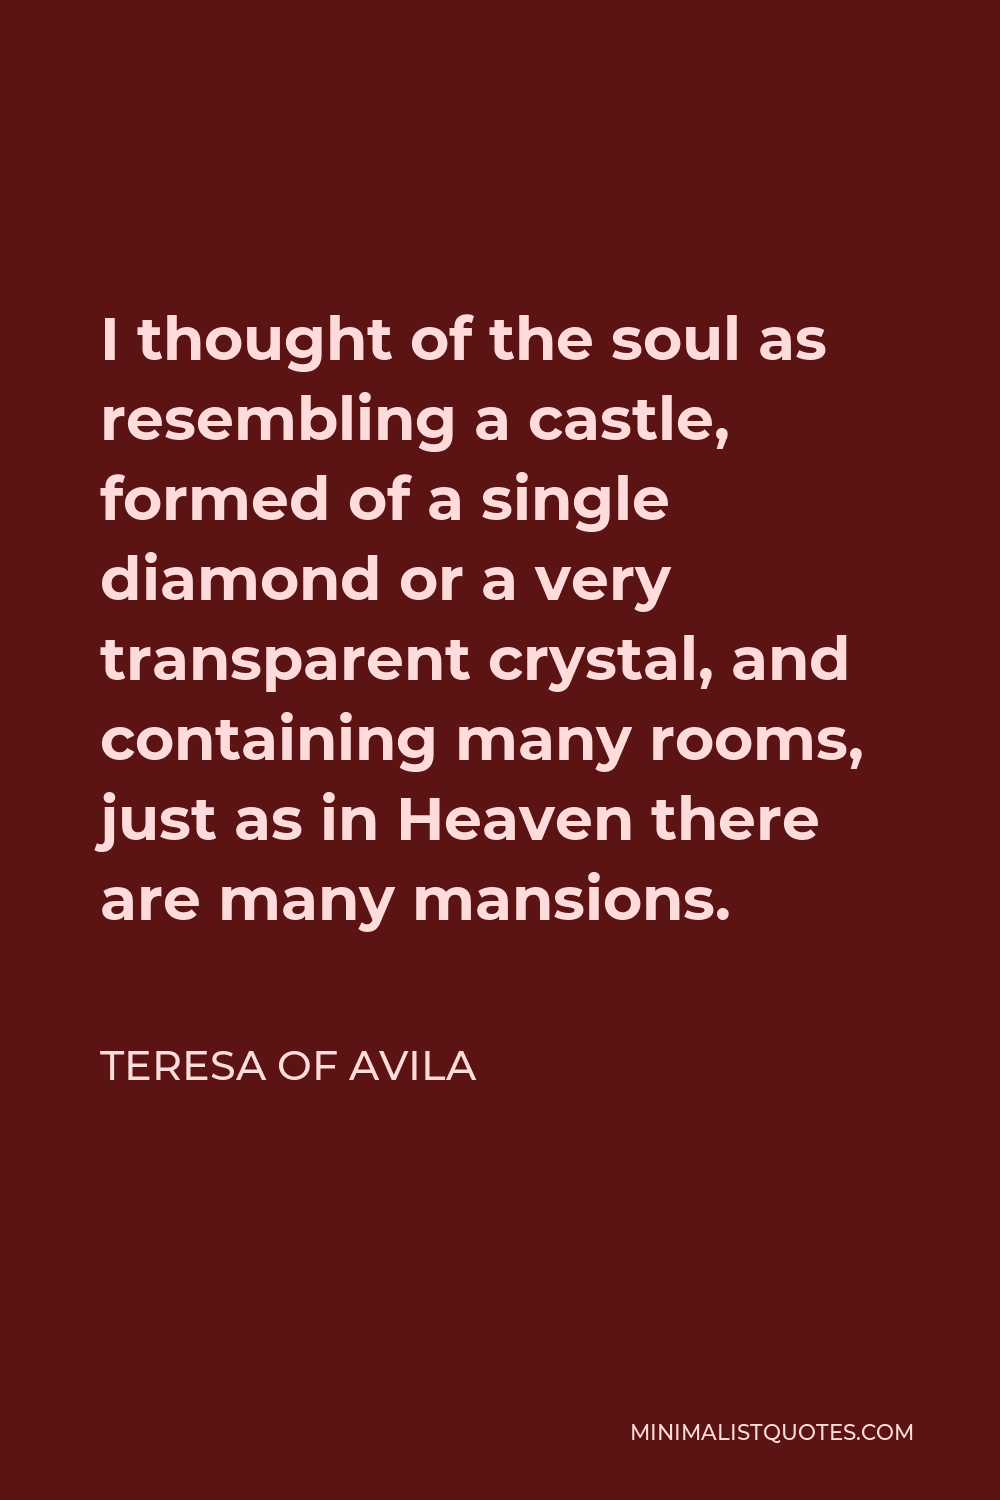 Teresa of Avila Quote - I thought of the soul as resembling a castle, formed of a single diamond or a very transparent crystal, and containing many rooms, just as in Heaven there are many mansions.